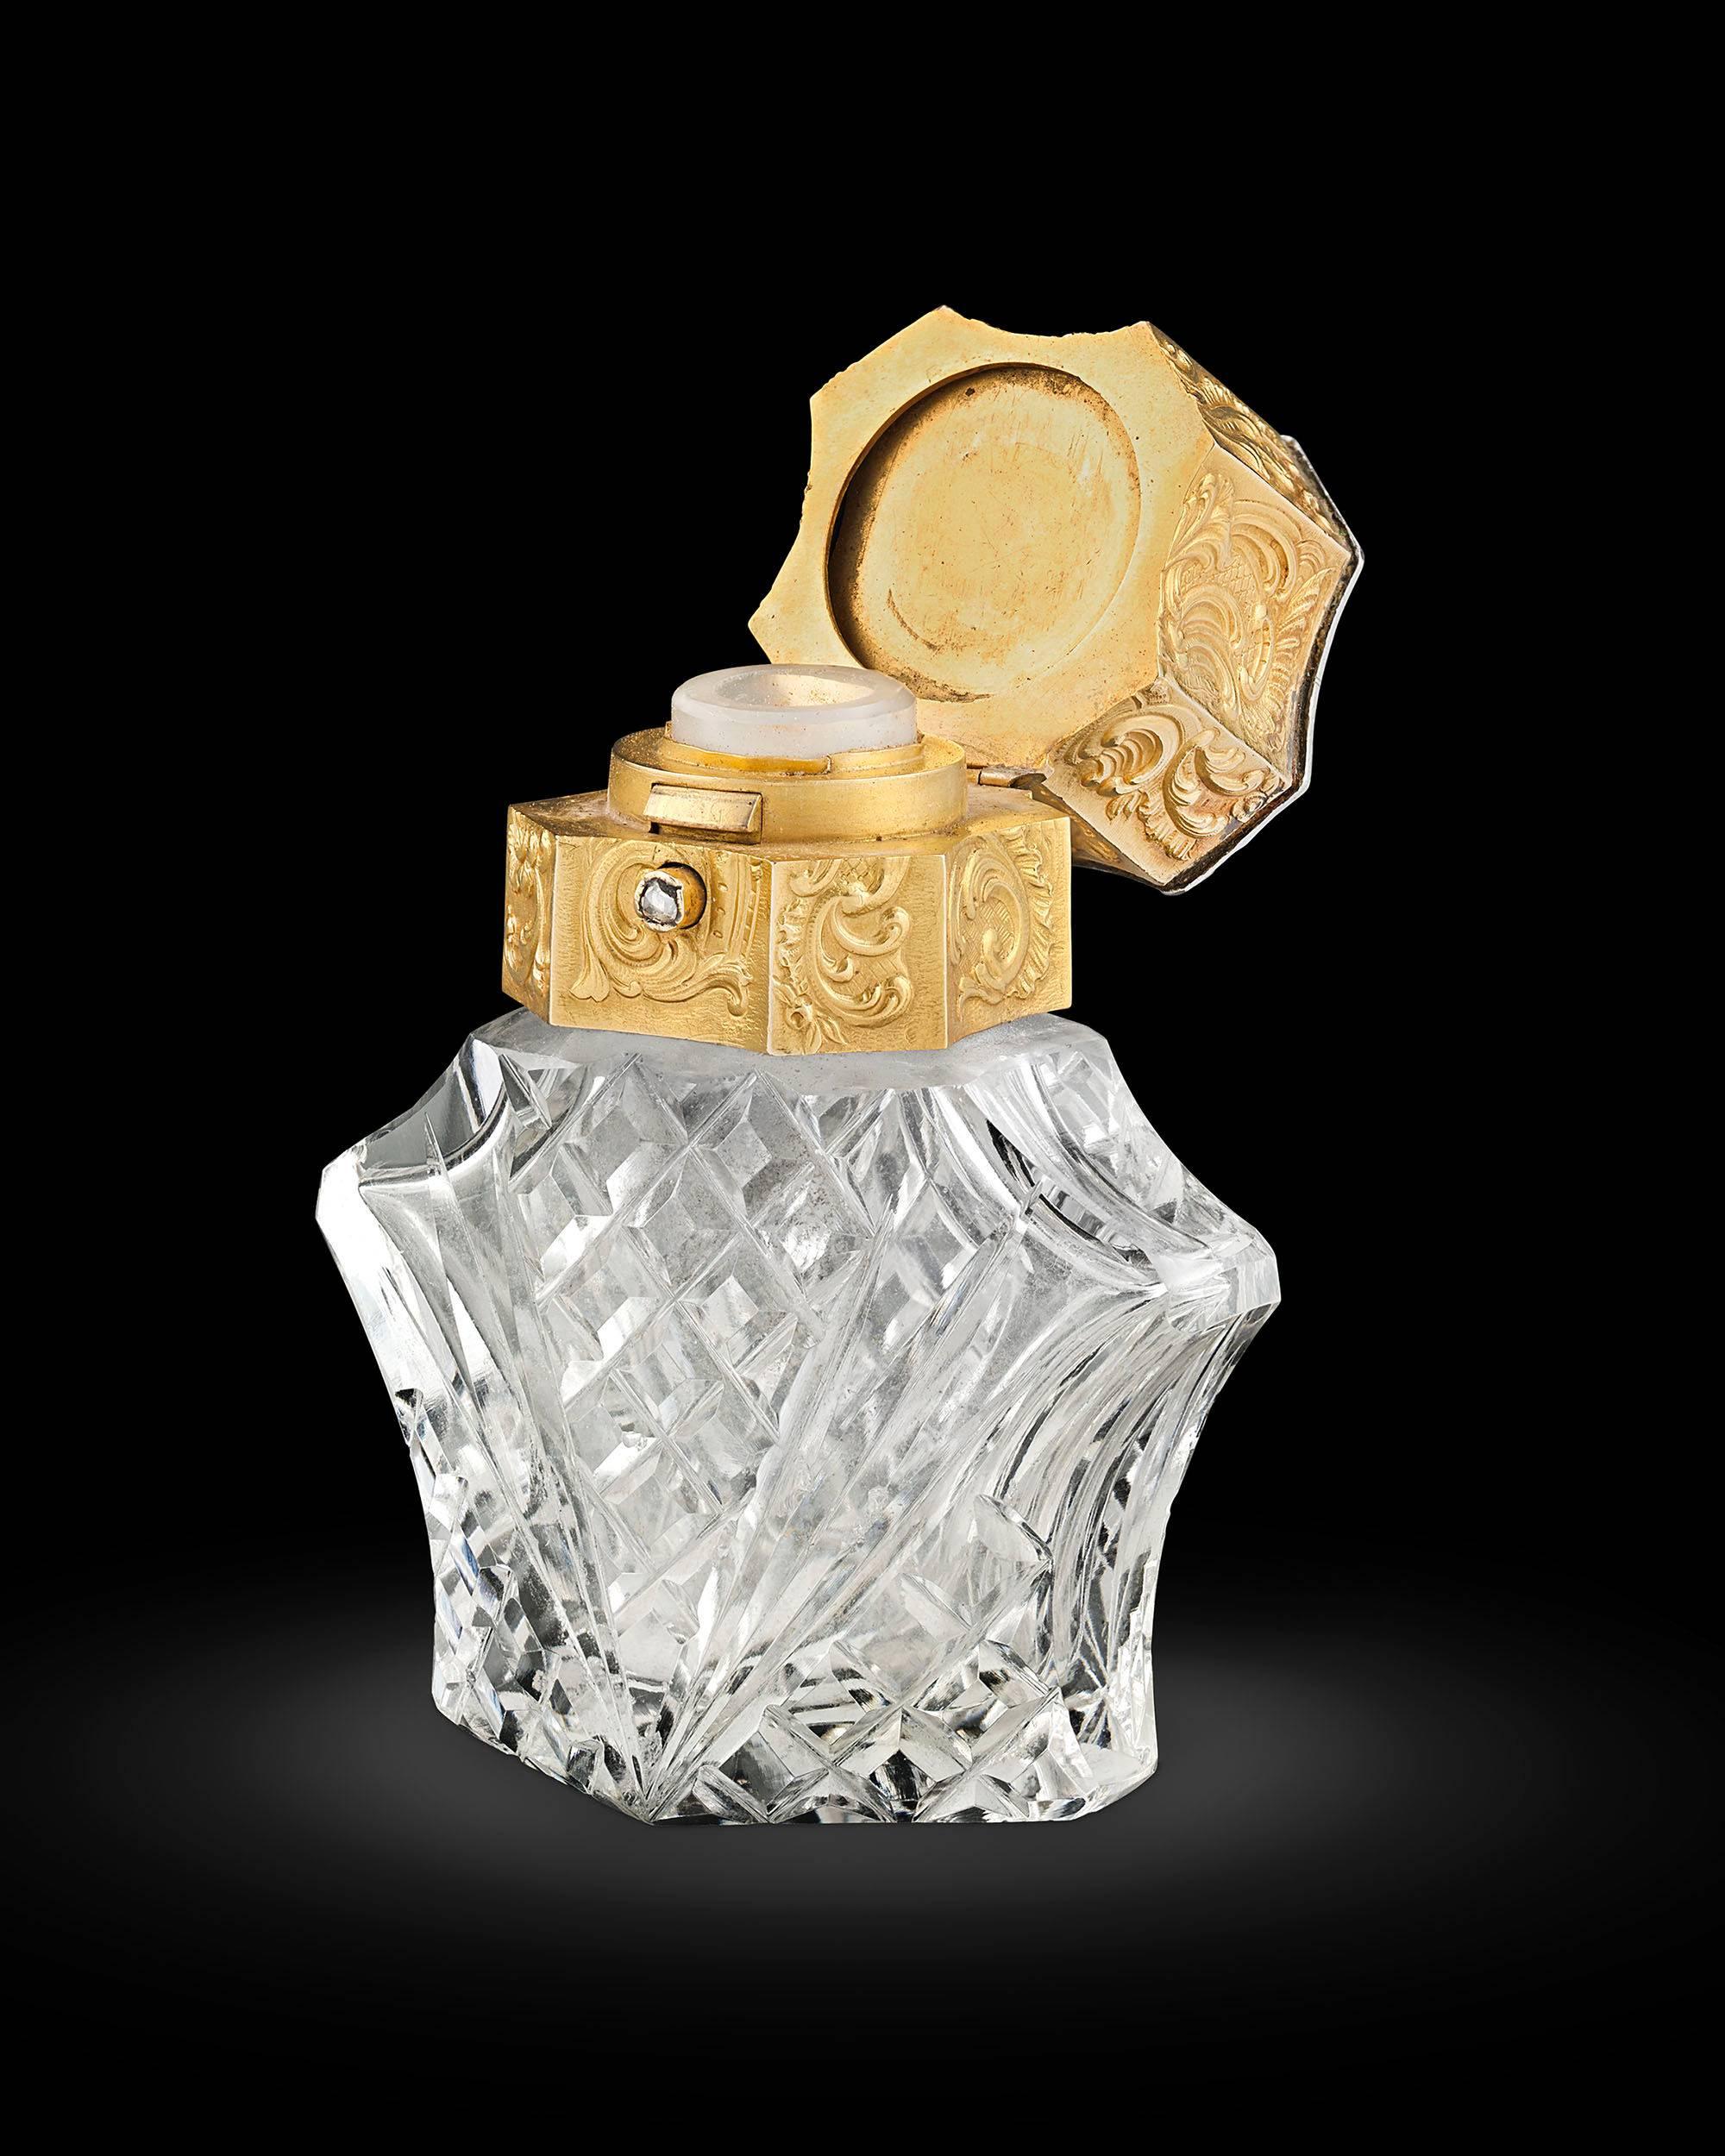 The quintessence of luxury, this opulent French crystal bottle is an exquisite objet d'art. Masterfully crafted from crystal, the piece is topped by a stunning 24k gold lid covered in an elaborate scrollwork design. A dramatic Siberian amethyst